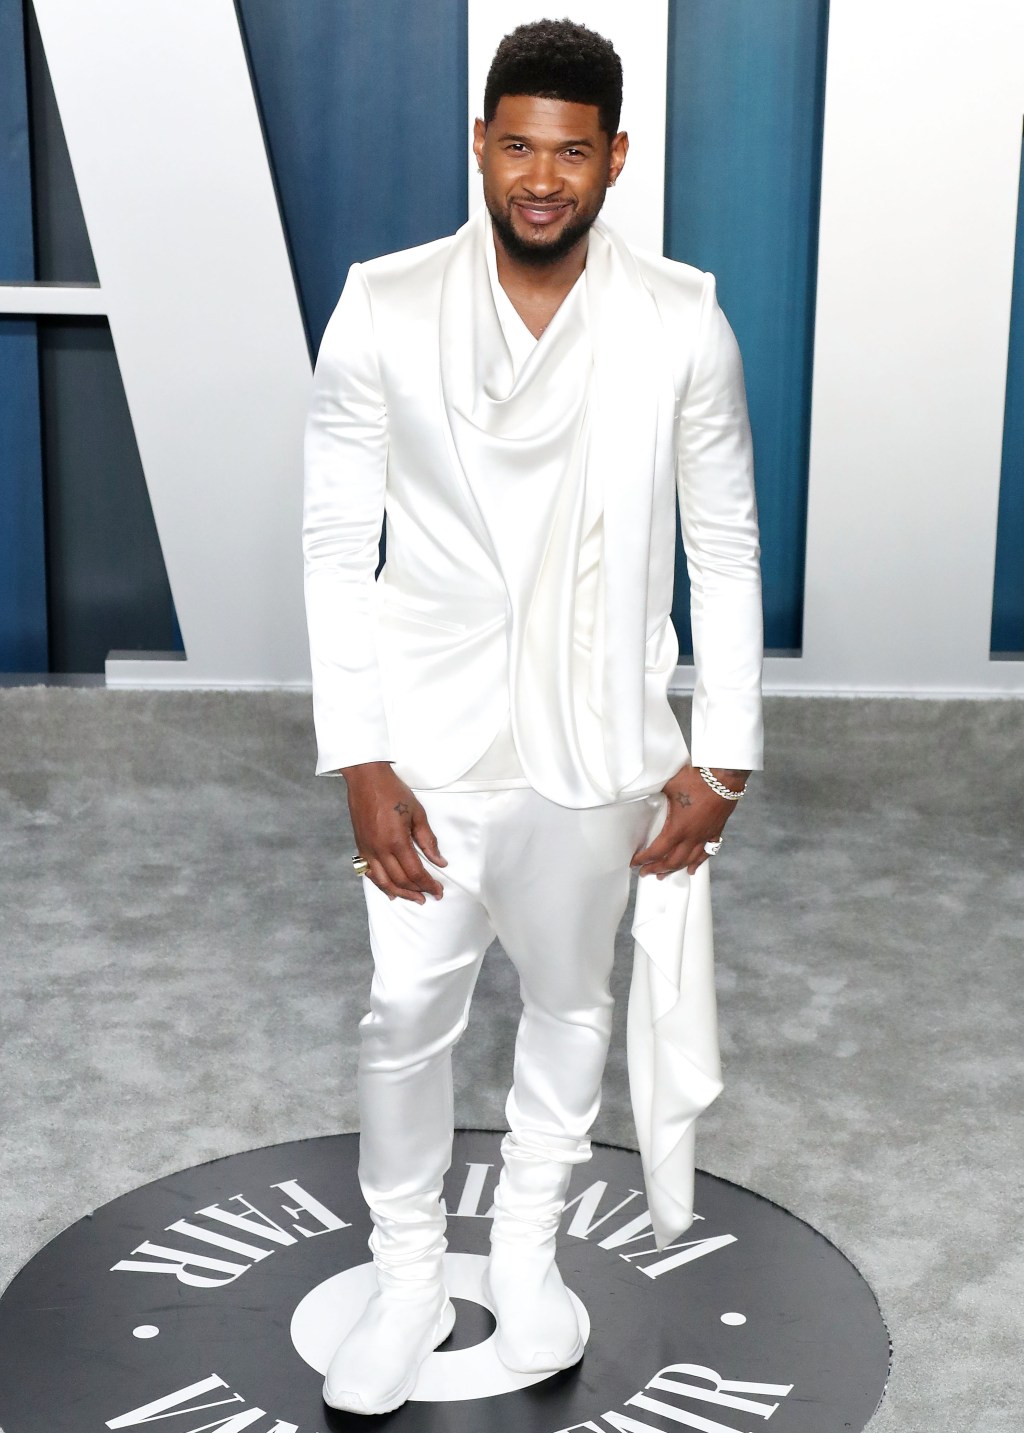 Usher arrives at the 2020 Vanity Fair Oscar Party held at the Wallis Annenberg Center for the Perfor...